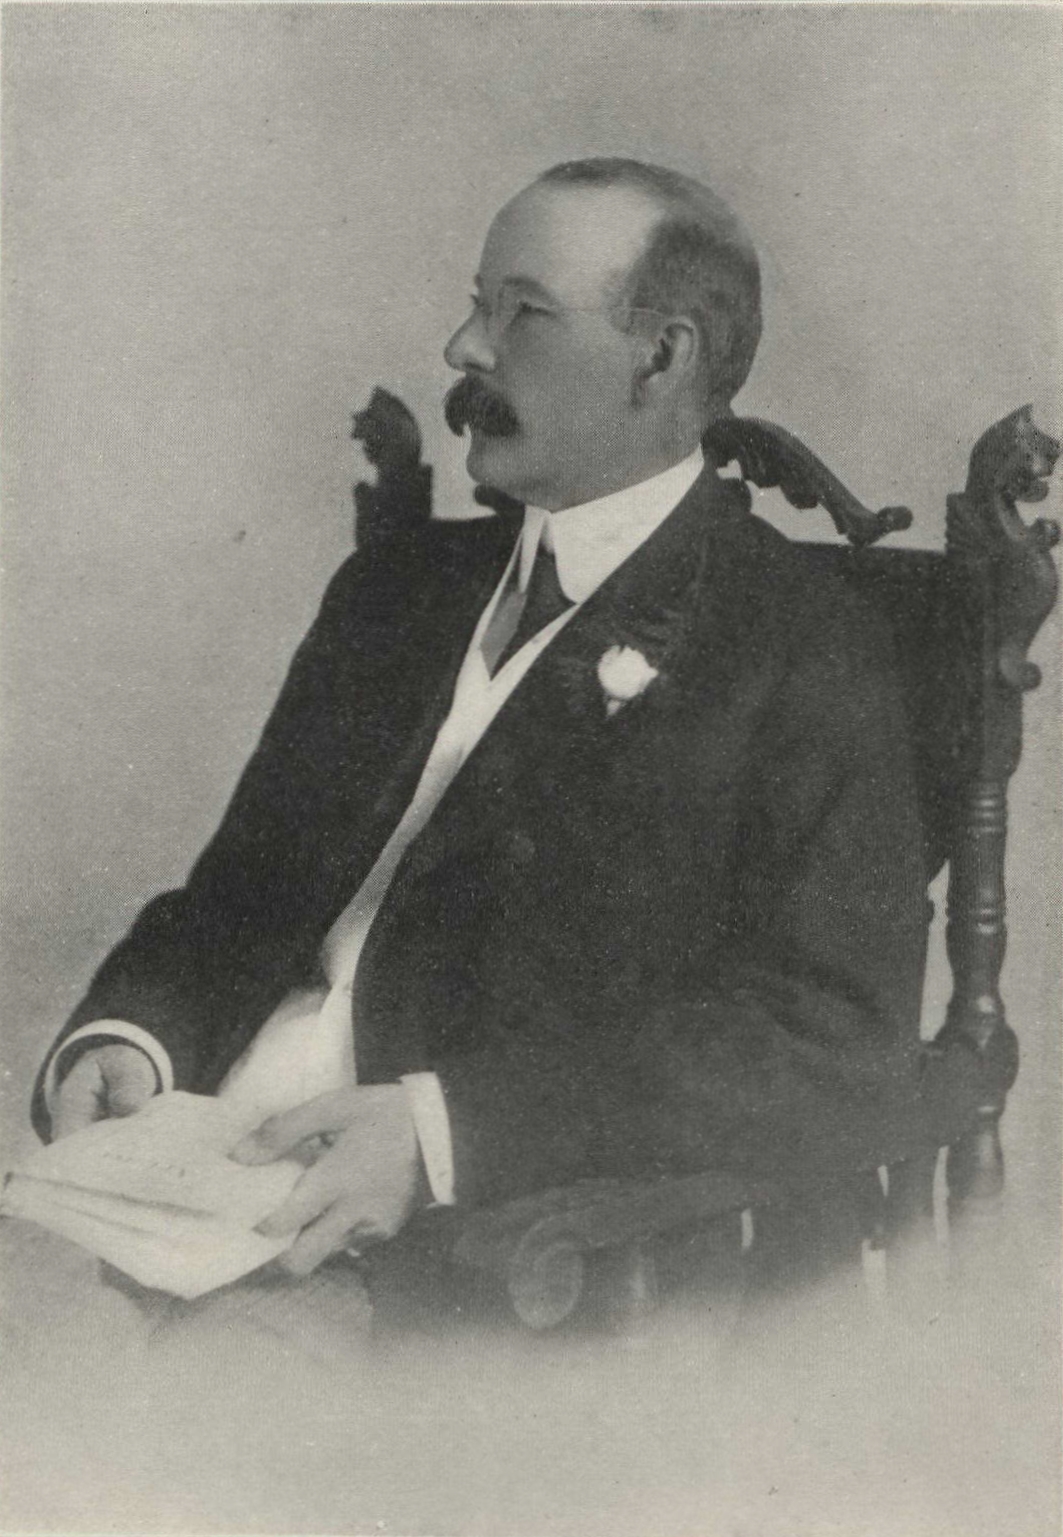 David R. Jack seated in chair